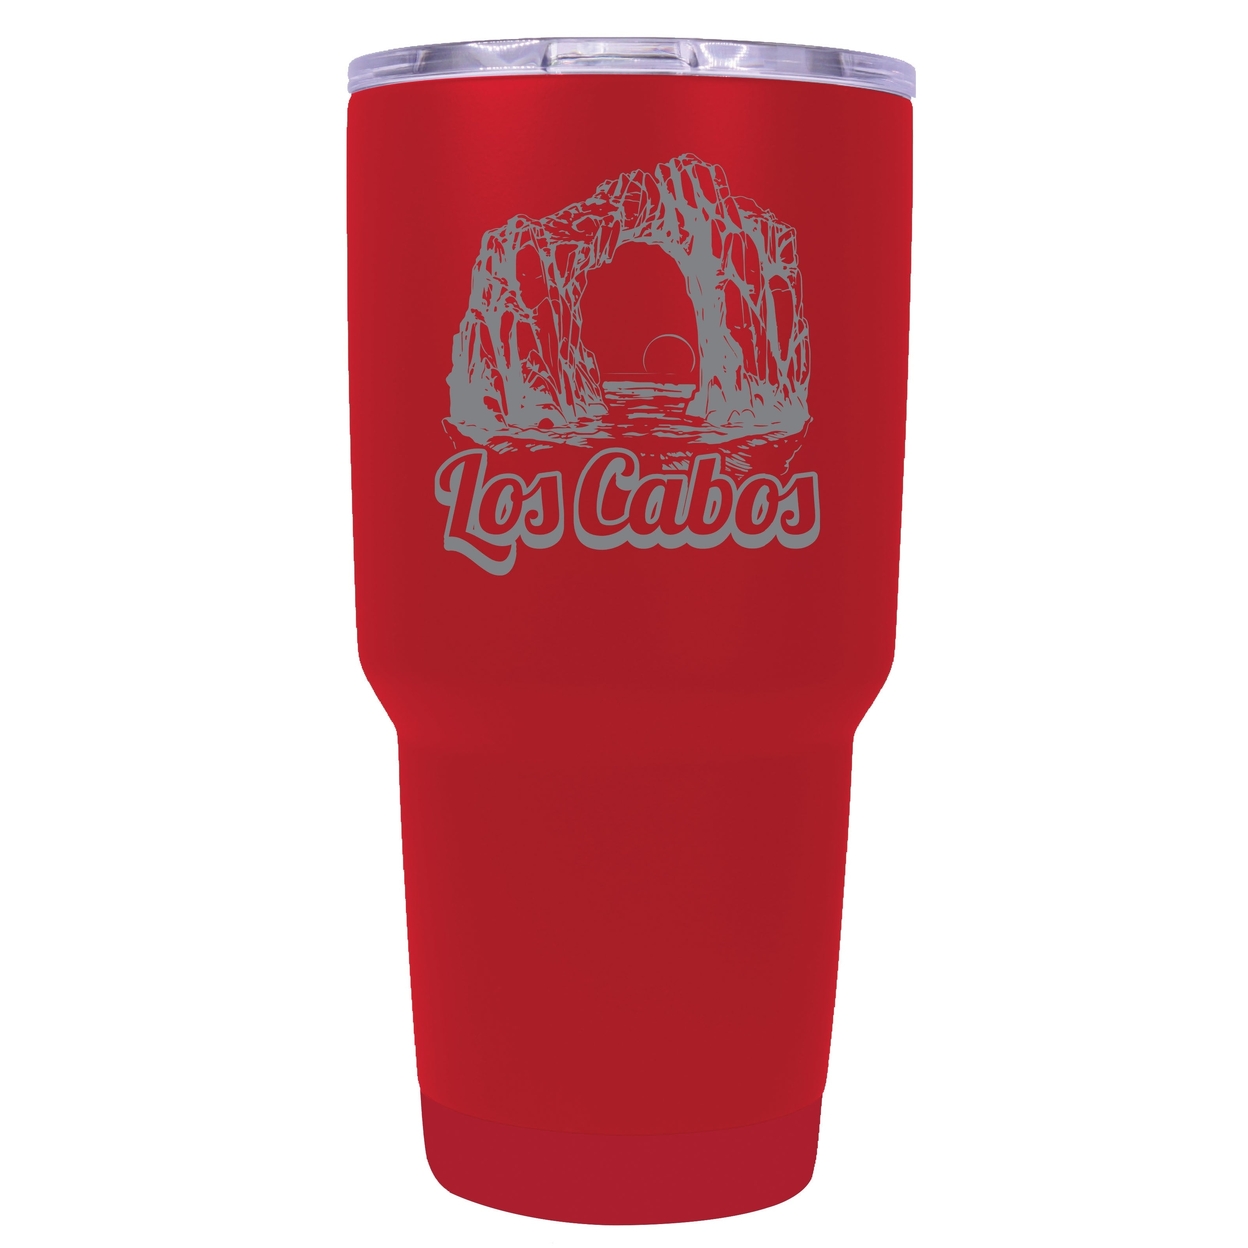 Los Cabos Mexico Souvenir 24 Oz Engraved Insulated Stainless Steel Tumbler - Black,,2-Pack